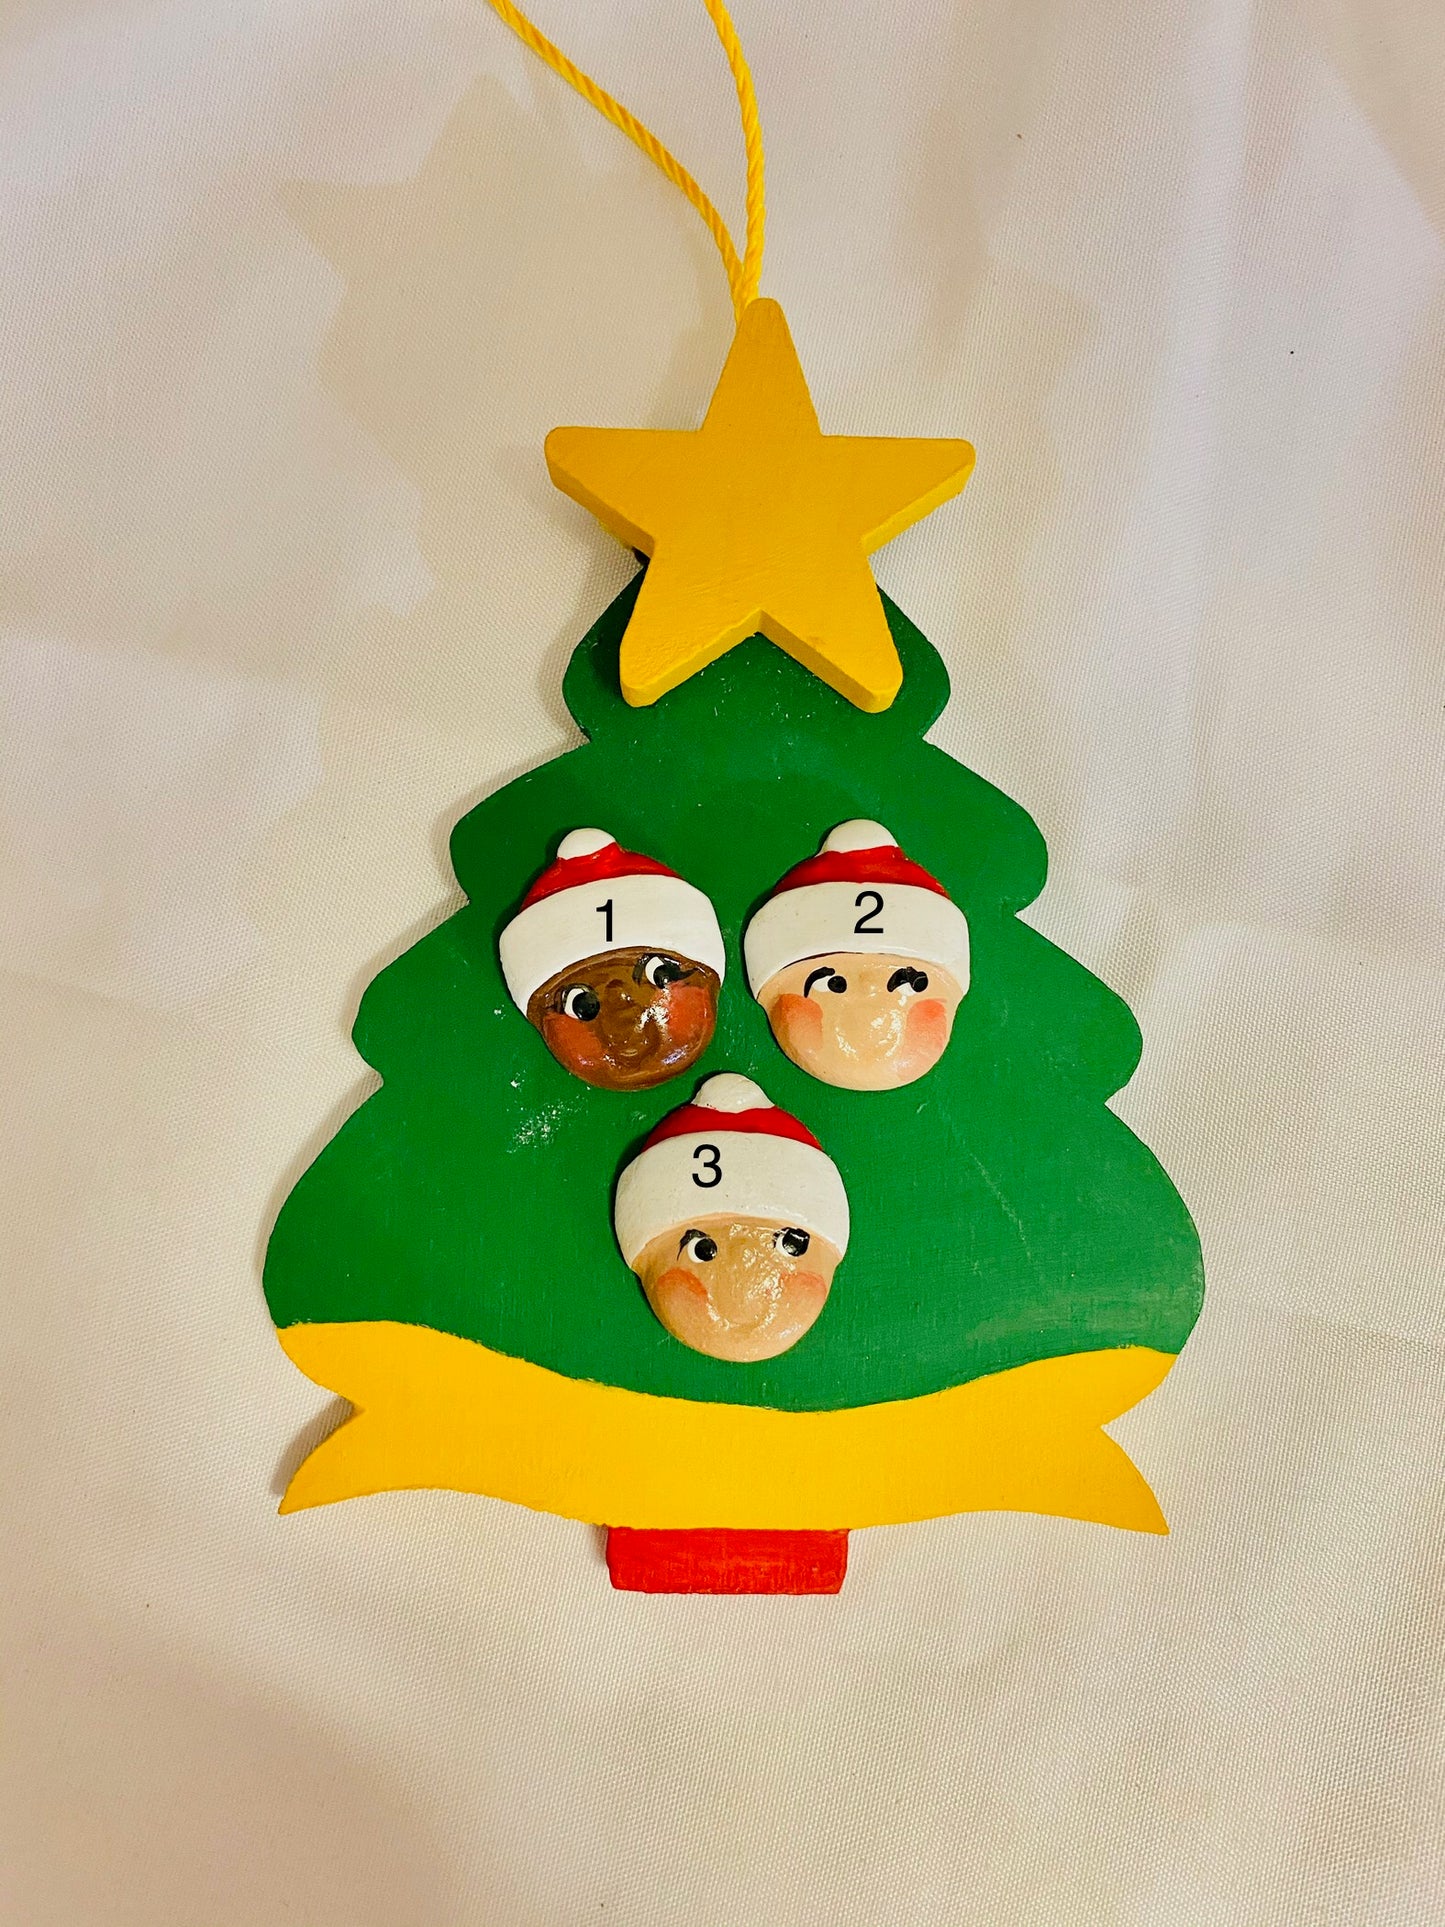 Personalized Ornament 3 Santa Faces on Christmas Tree 4.5" x 3.5"